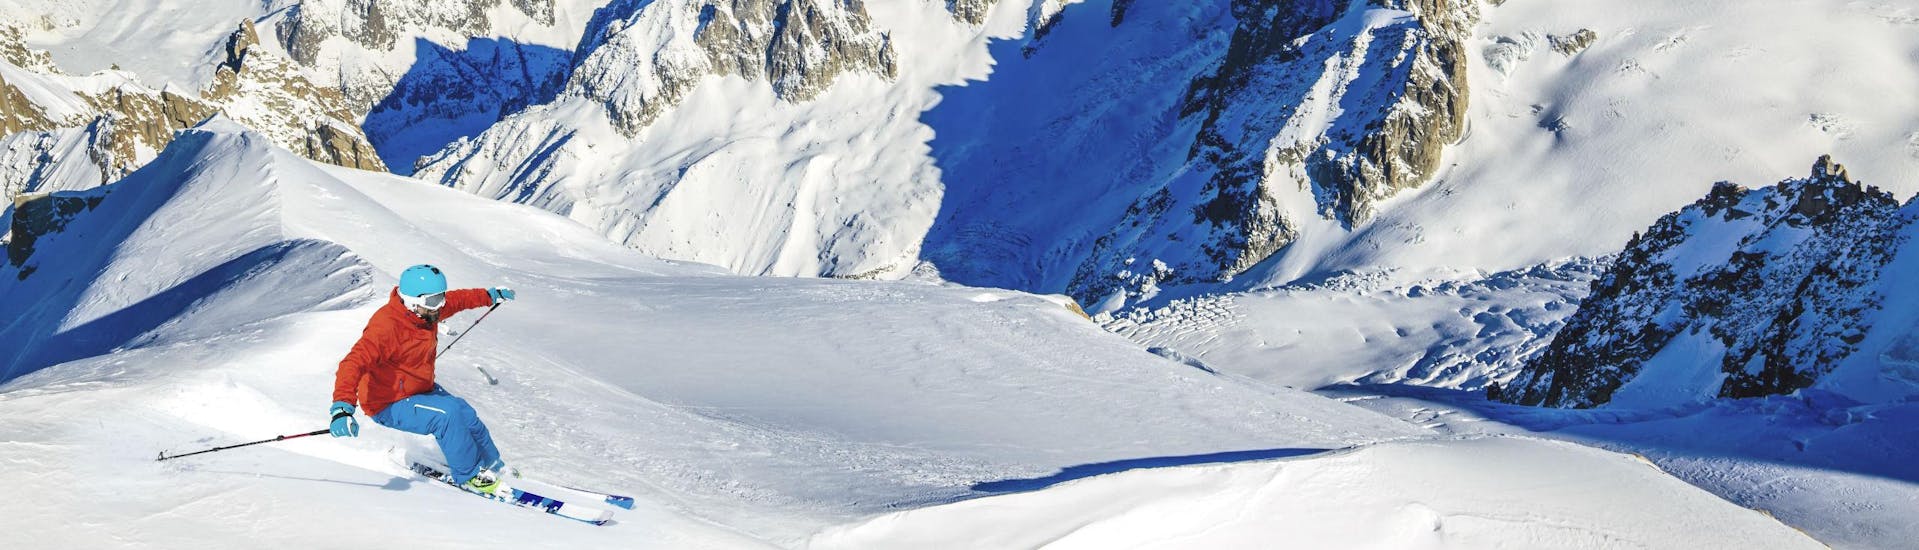 A skier is skiing through fresh powder snow on one of the slopes in Chamonix - Mont Blanc, where local ski schools offer a variety of ski lessons.